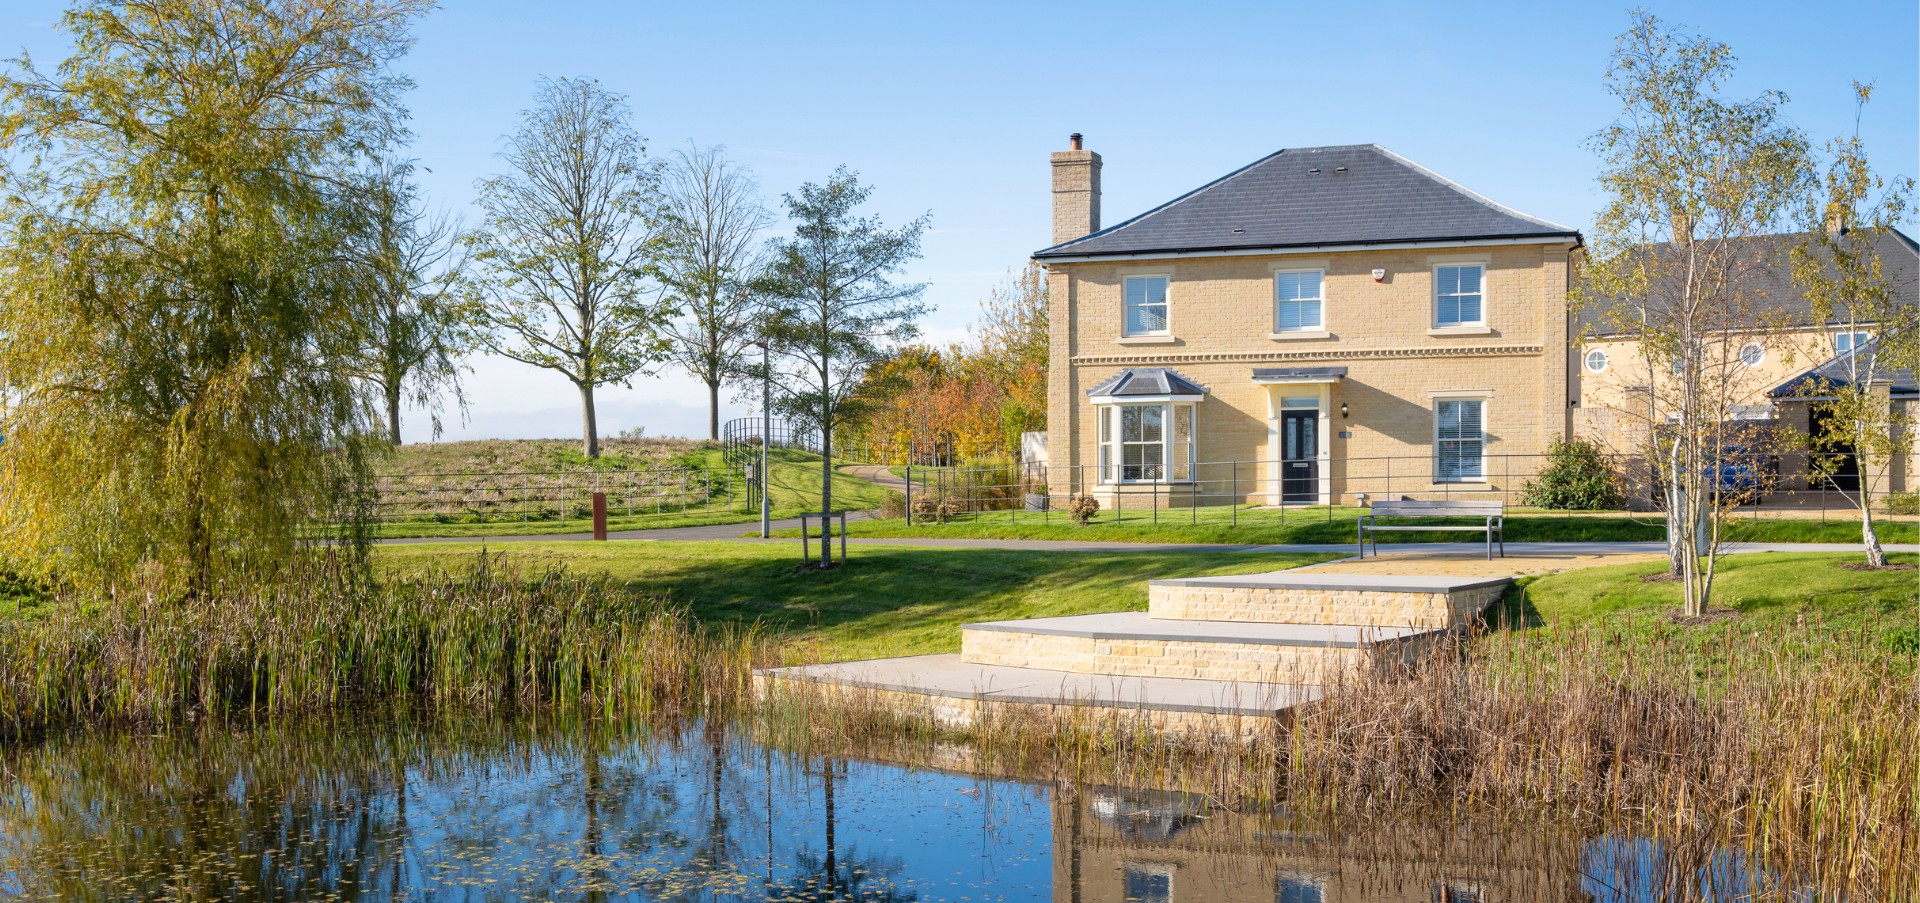 New Build Homes For Sale In East Anglia - Hopkins Homes